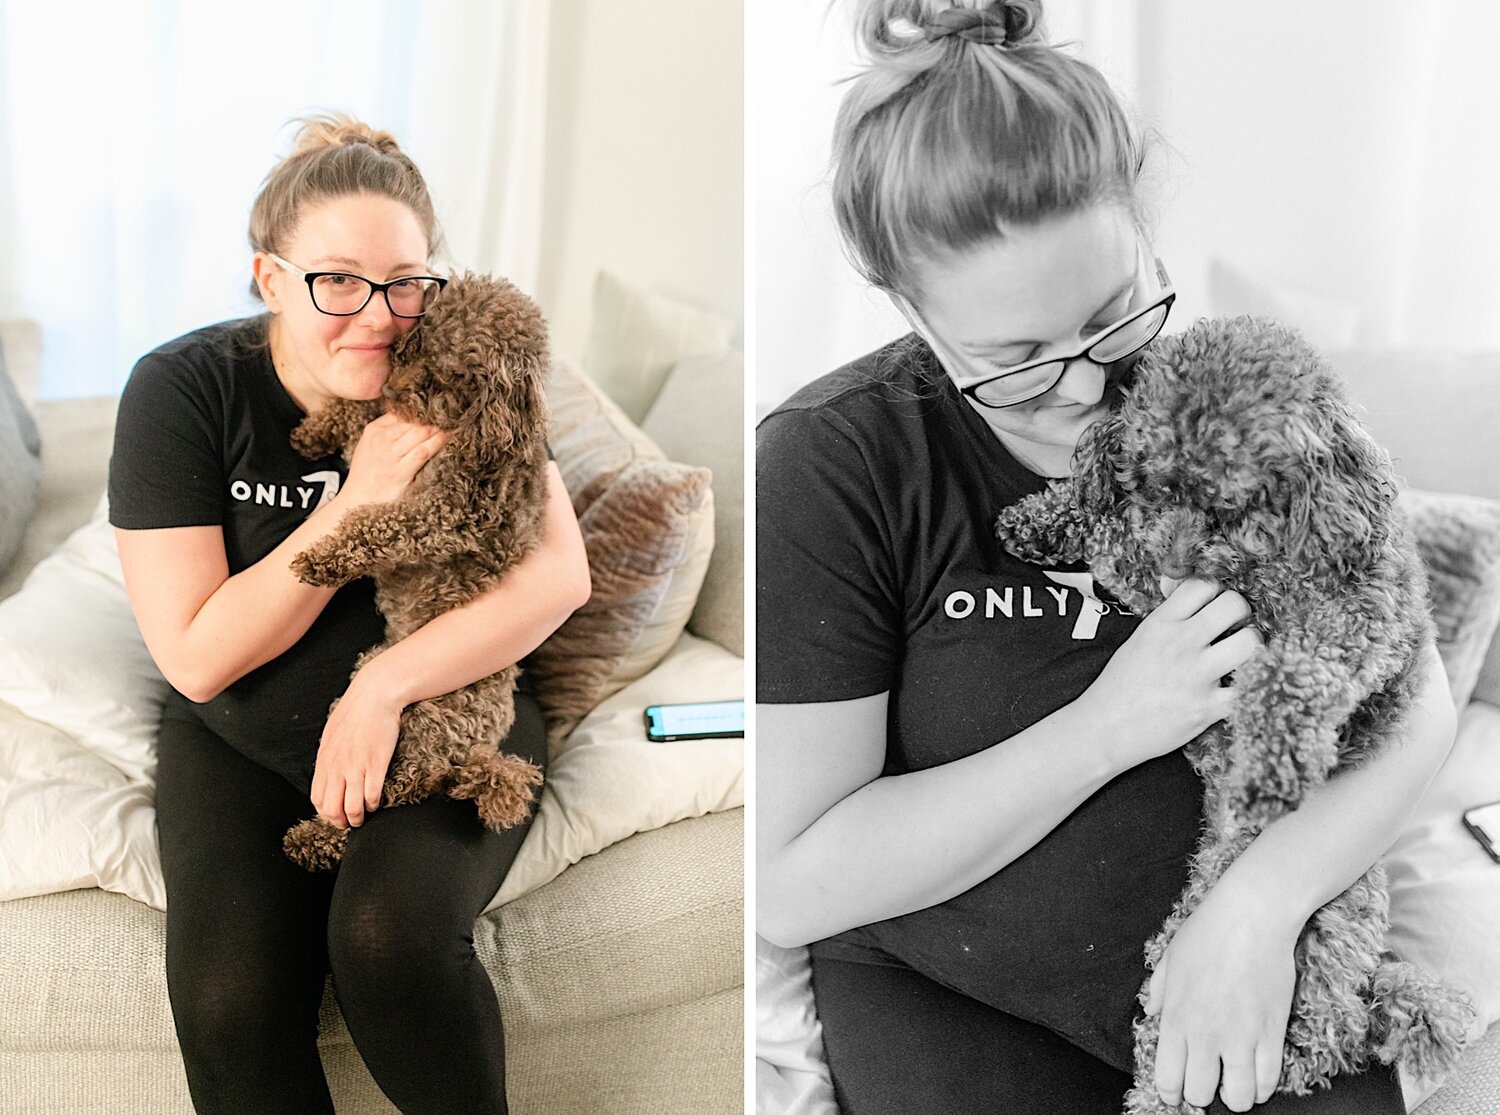 Saying goodbye to Coco… the last time I’d hold her as an “only child.” I started crying when we left her! We love her so much.